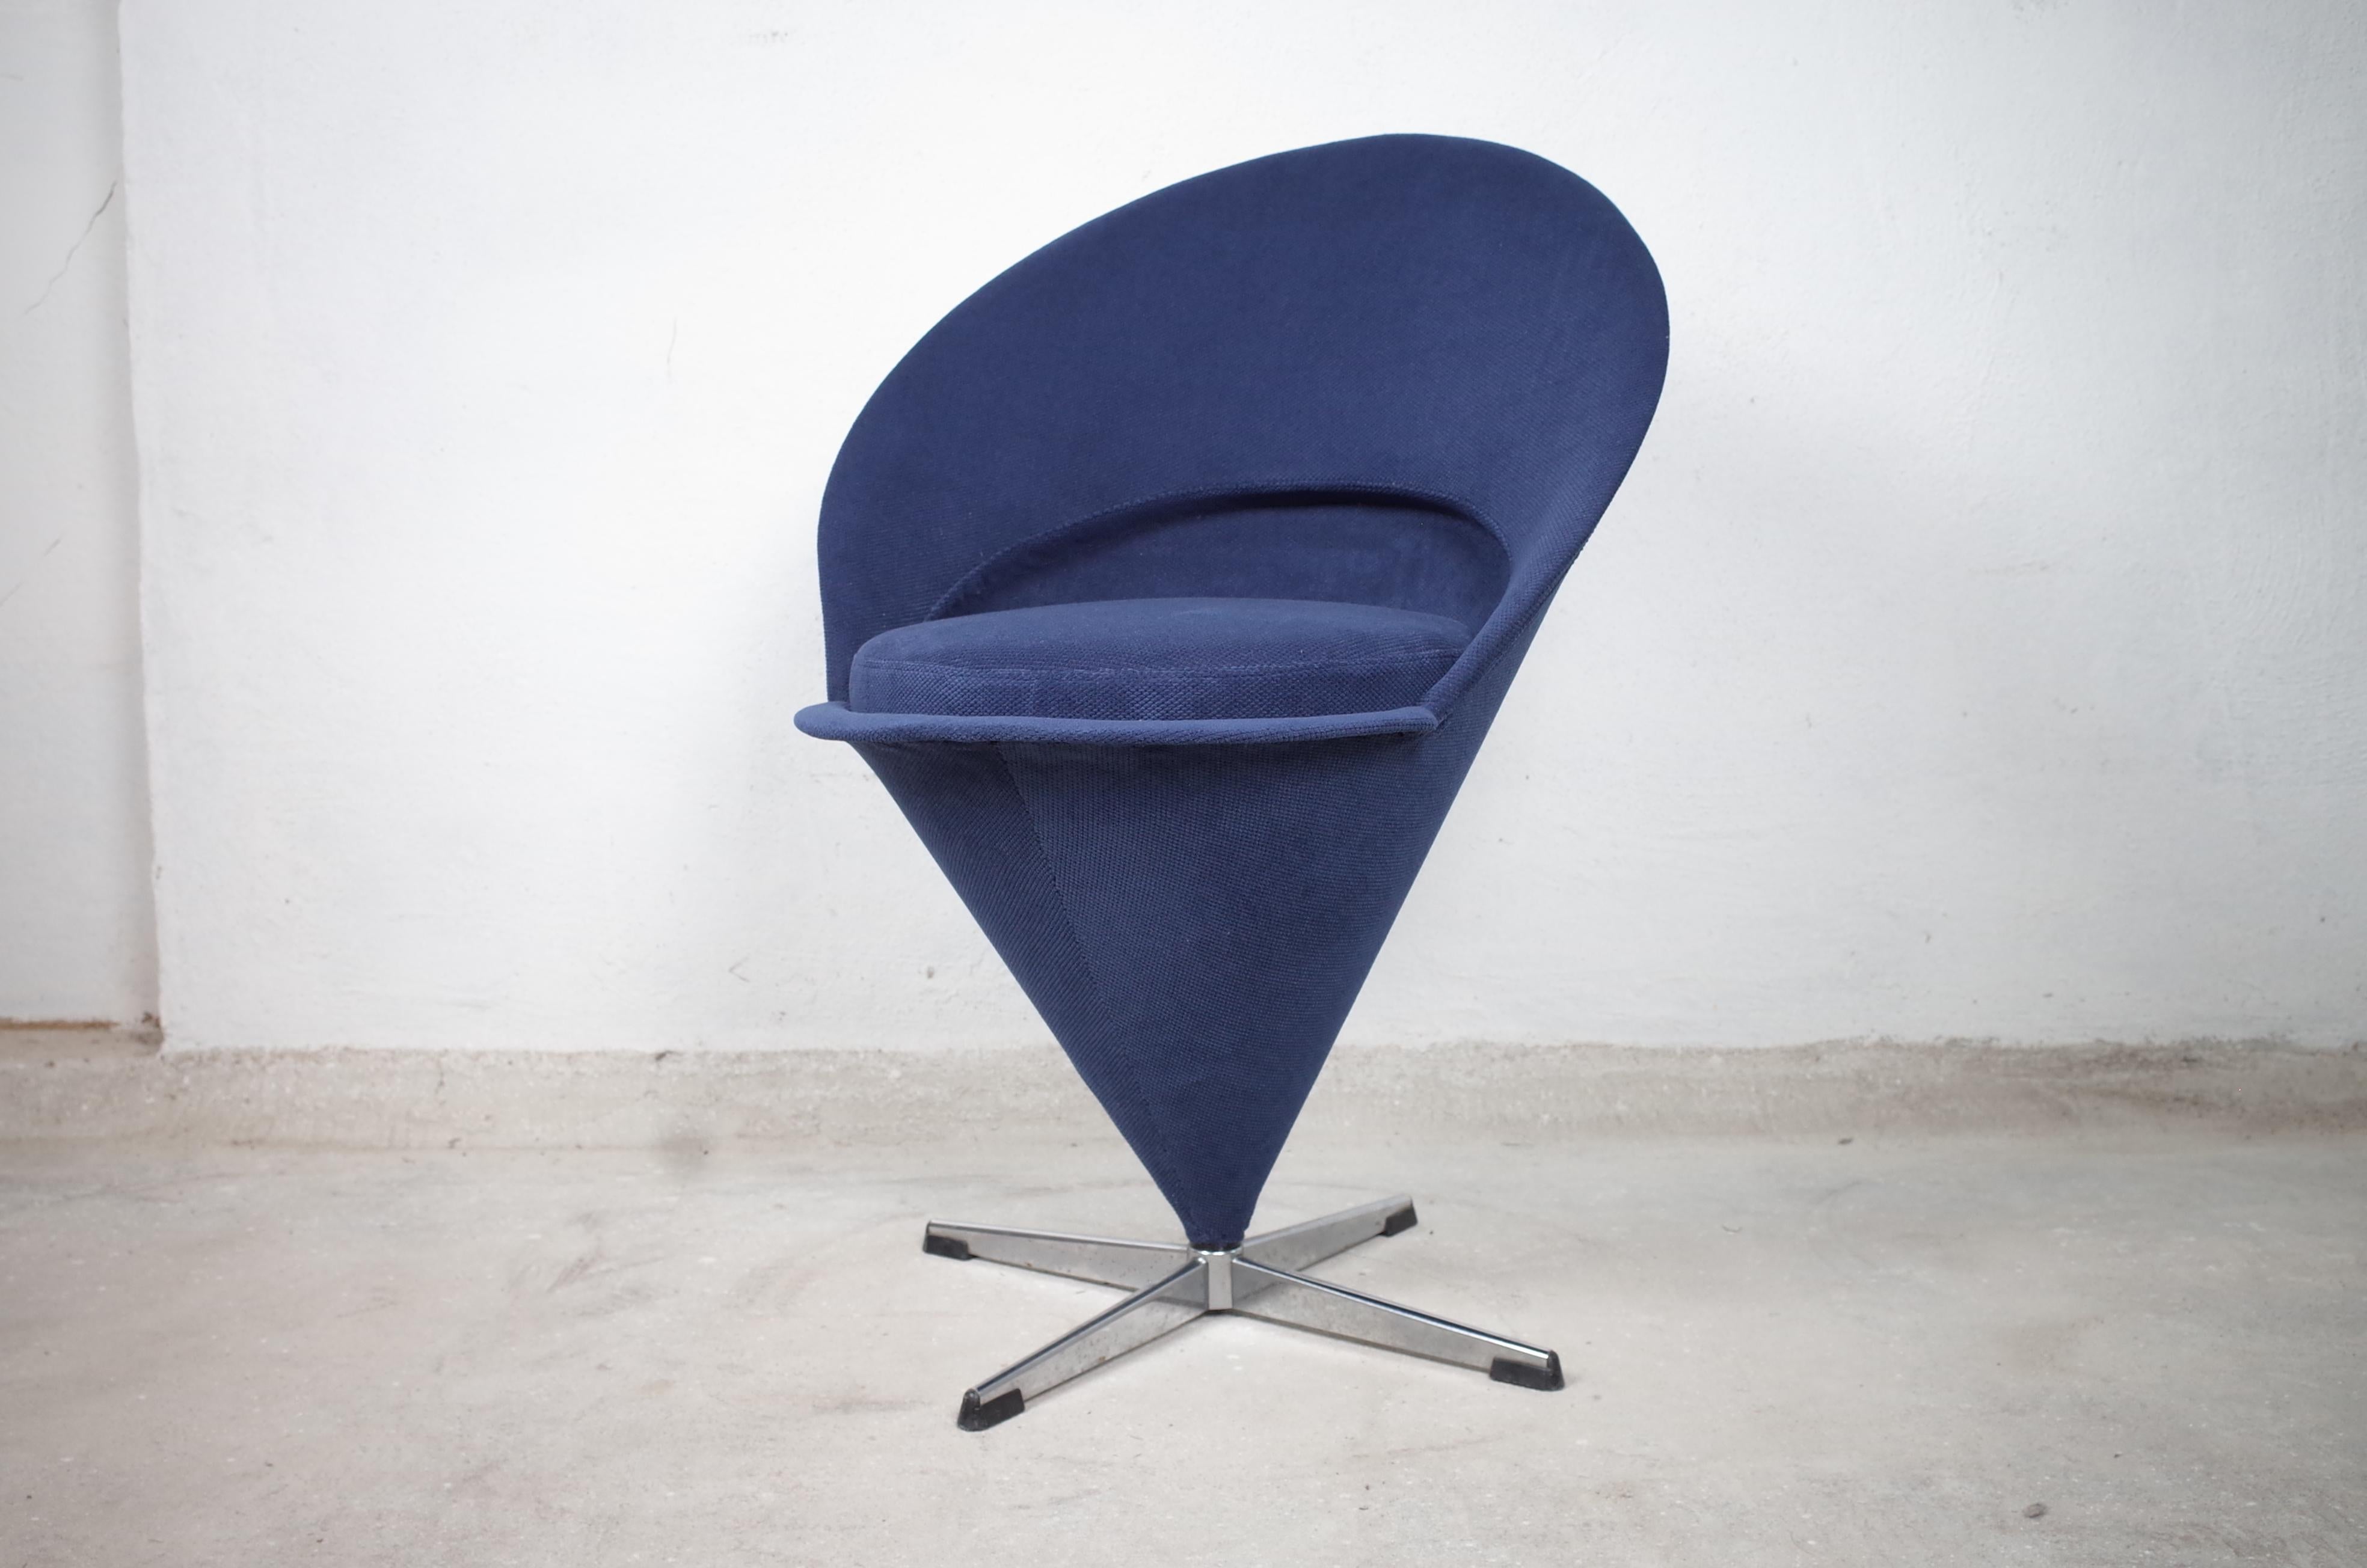 Midcentury Blue Cone Chair by Verner Panton, 1960s For Sale 3